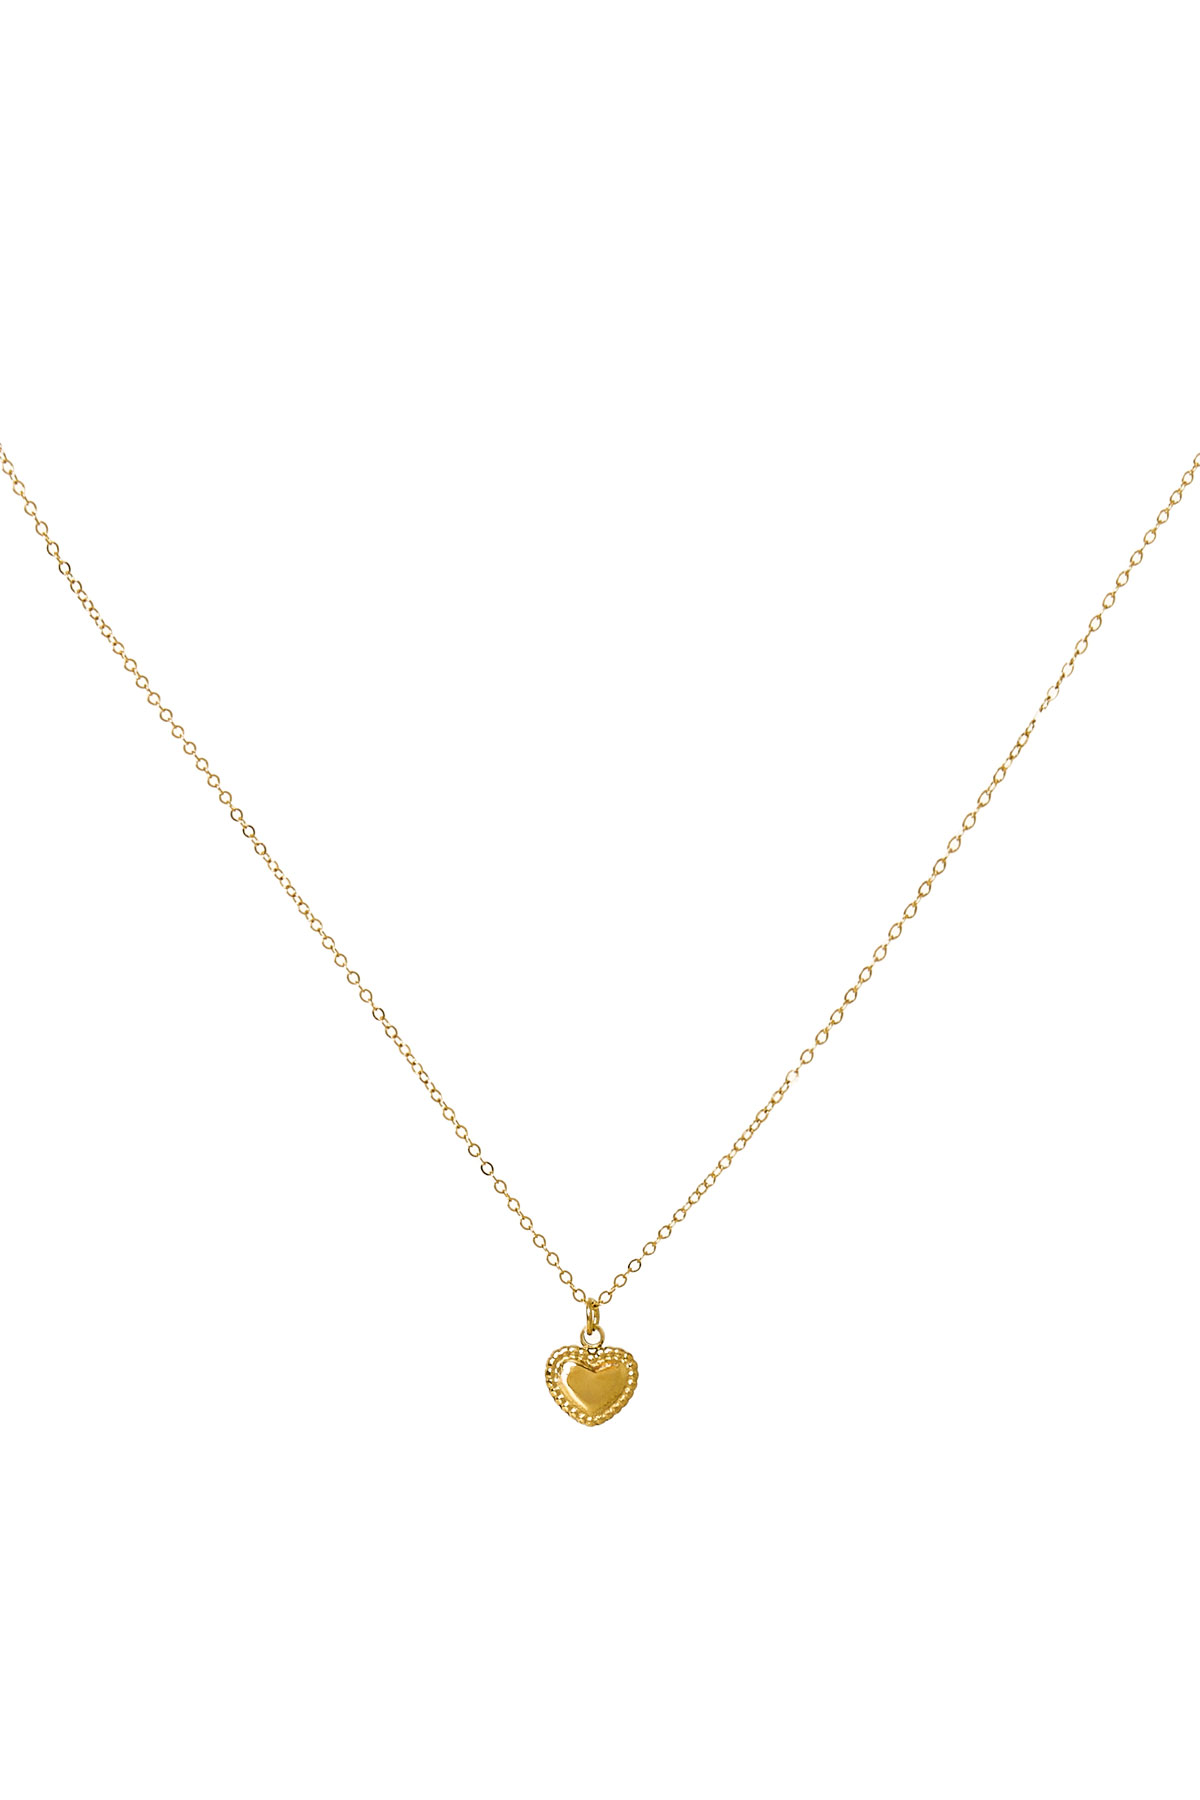 Double heart necklace - gold